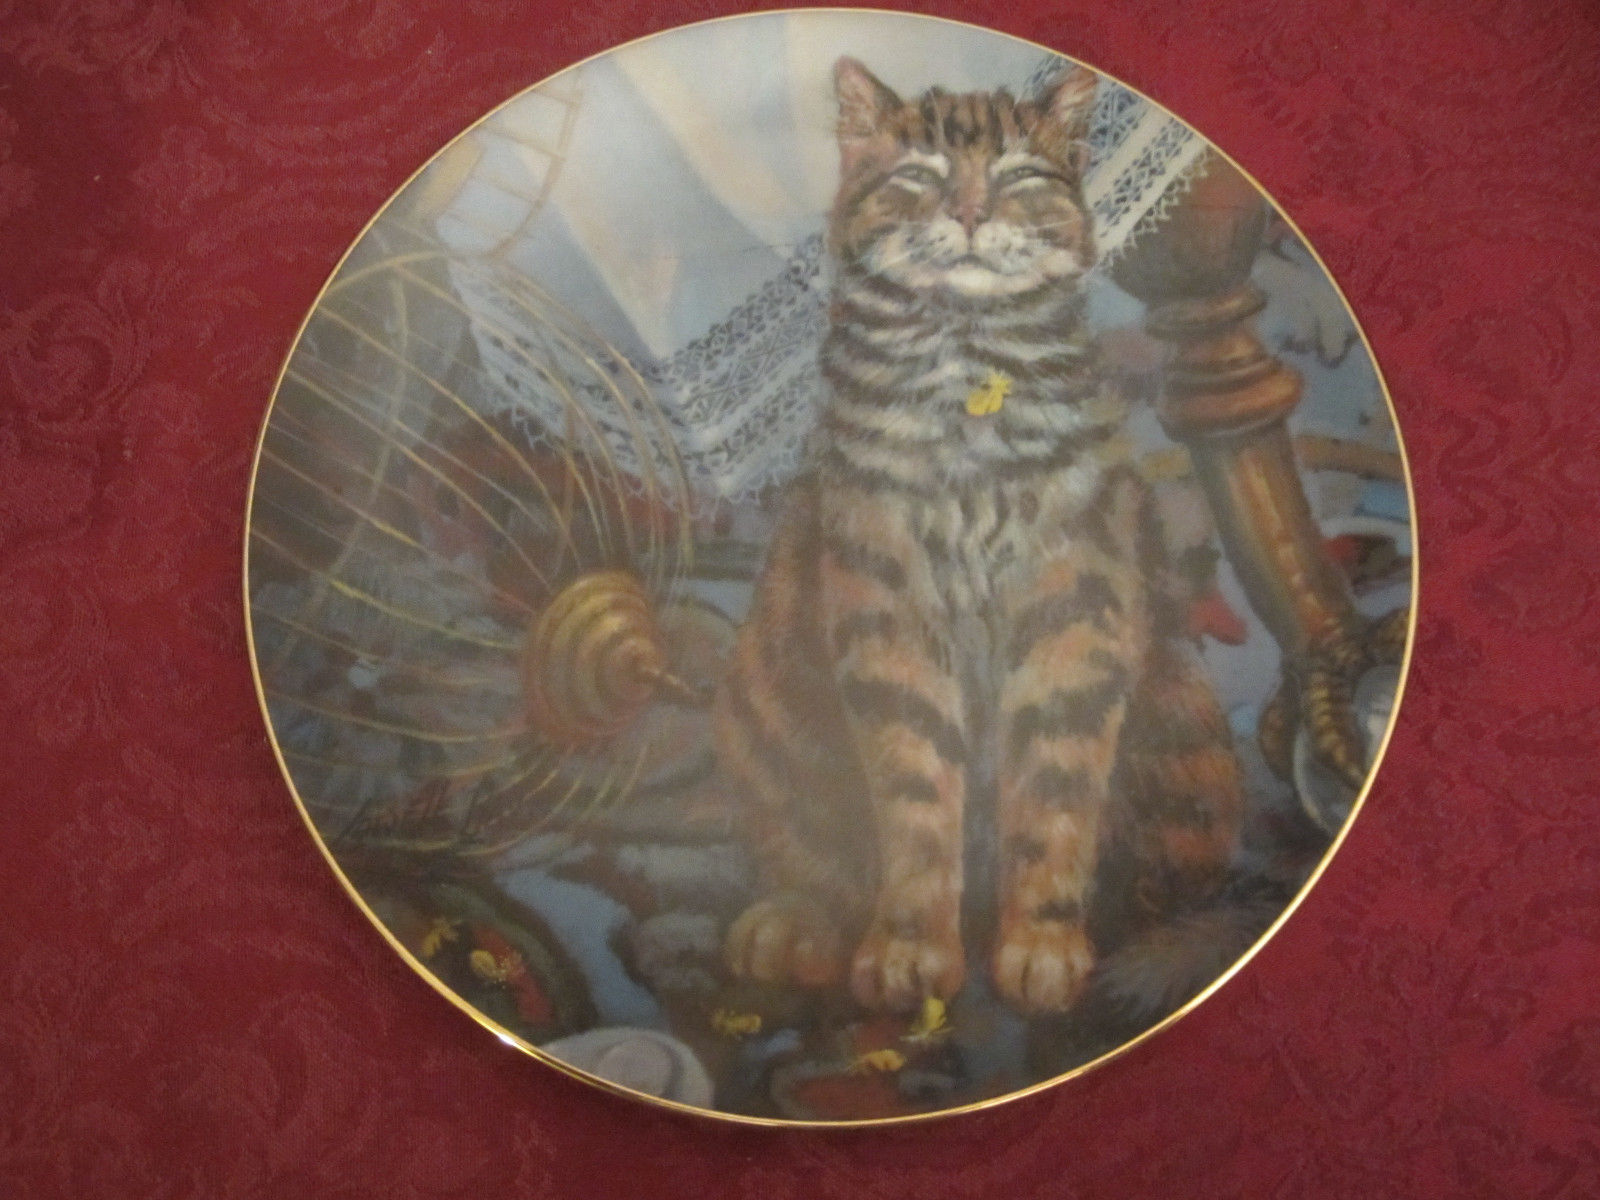 Primary image for FLEW THE COOP Orange Tabby Collector Plate LOWELL DAVIS Schmid RARE Cat Tales